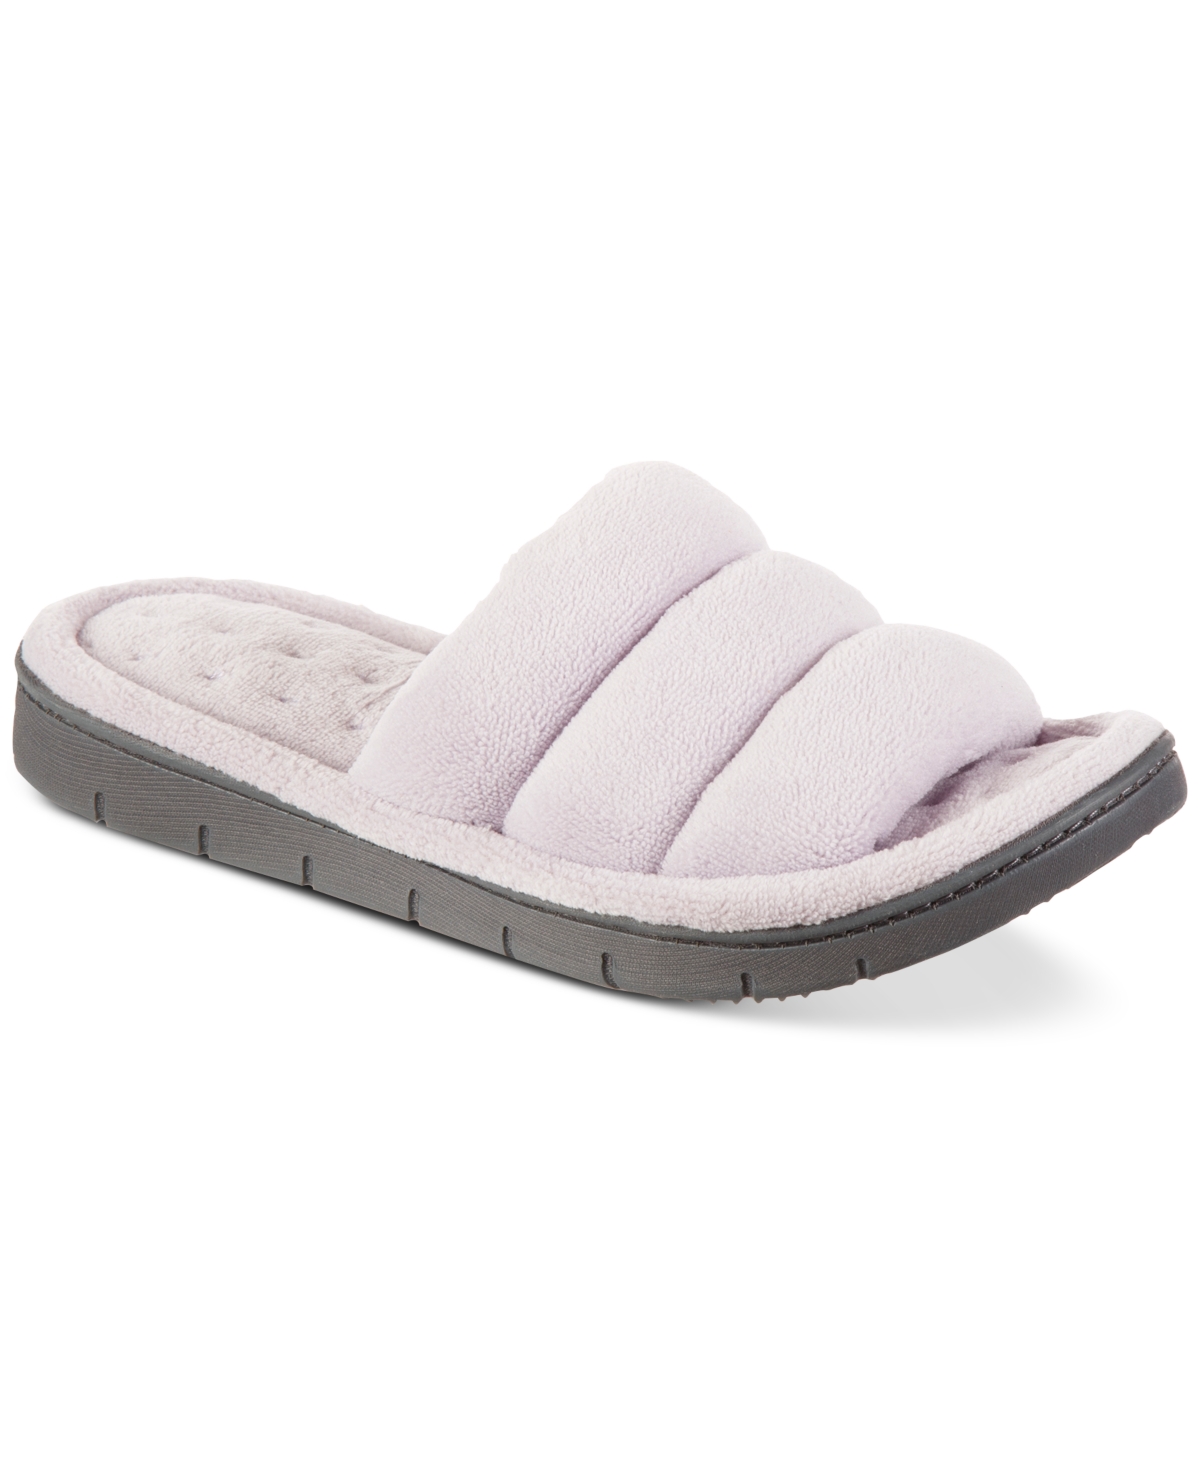 Isotoner Signature Women's Microterry Aster Slide Slippers